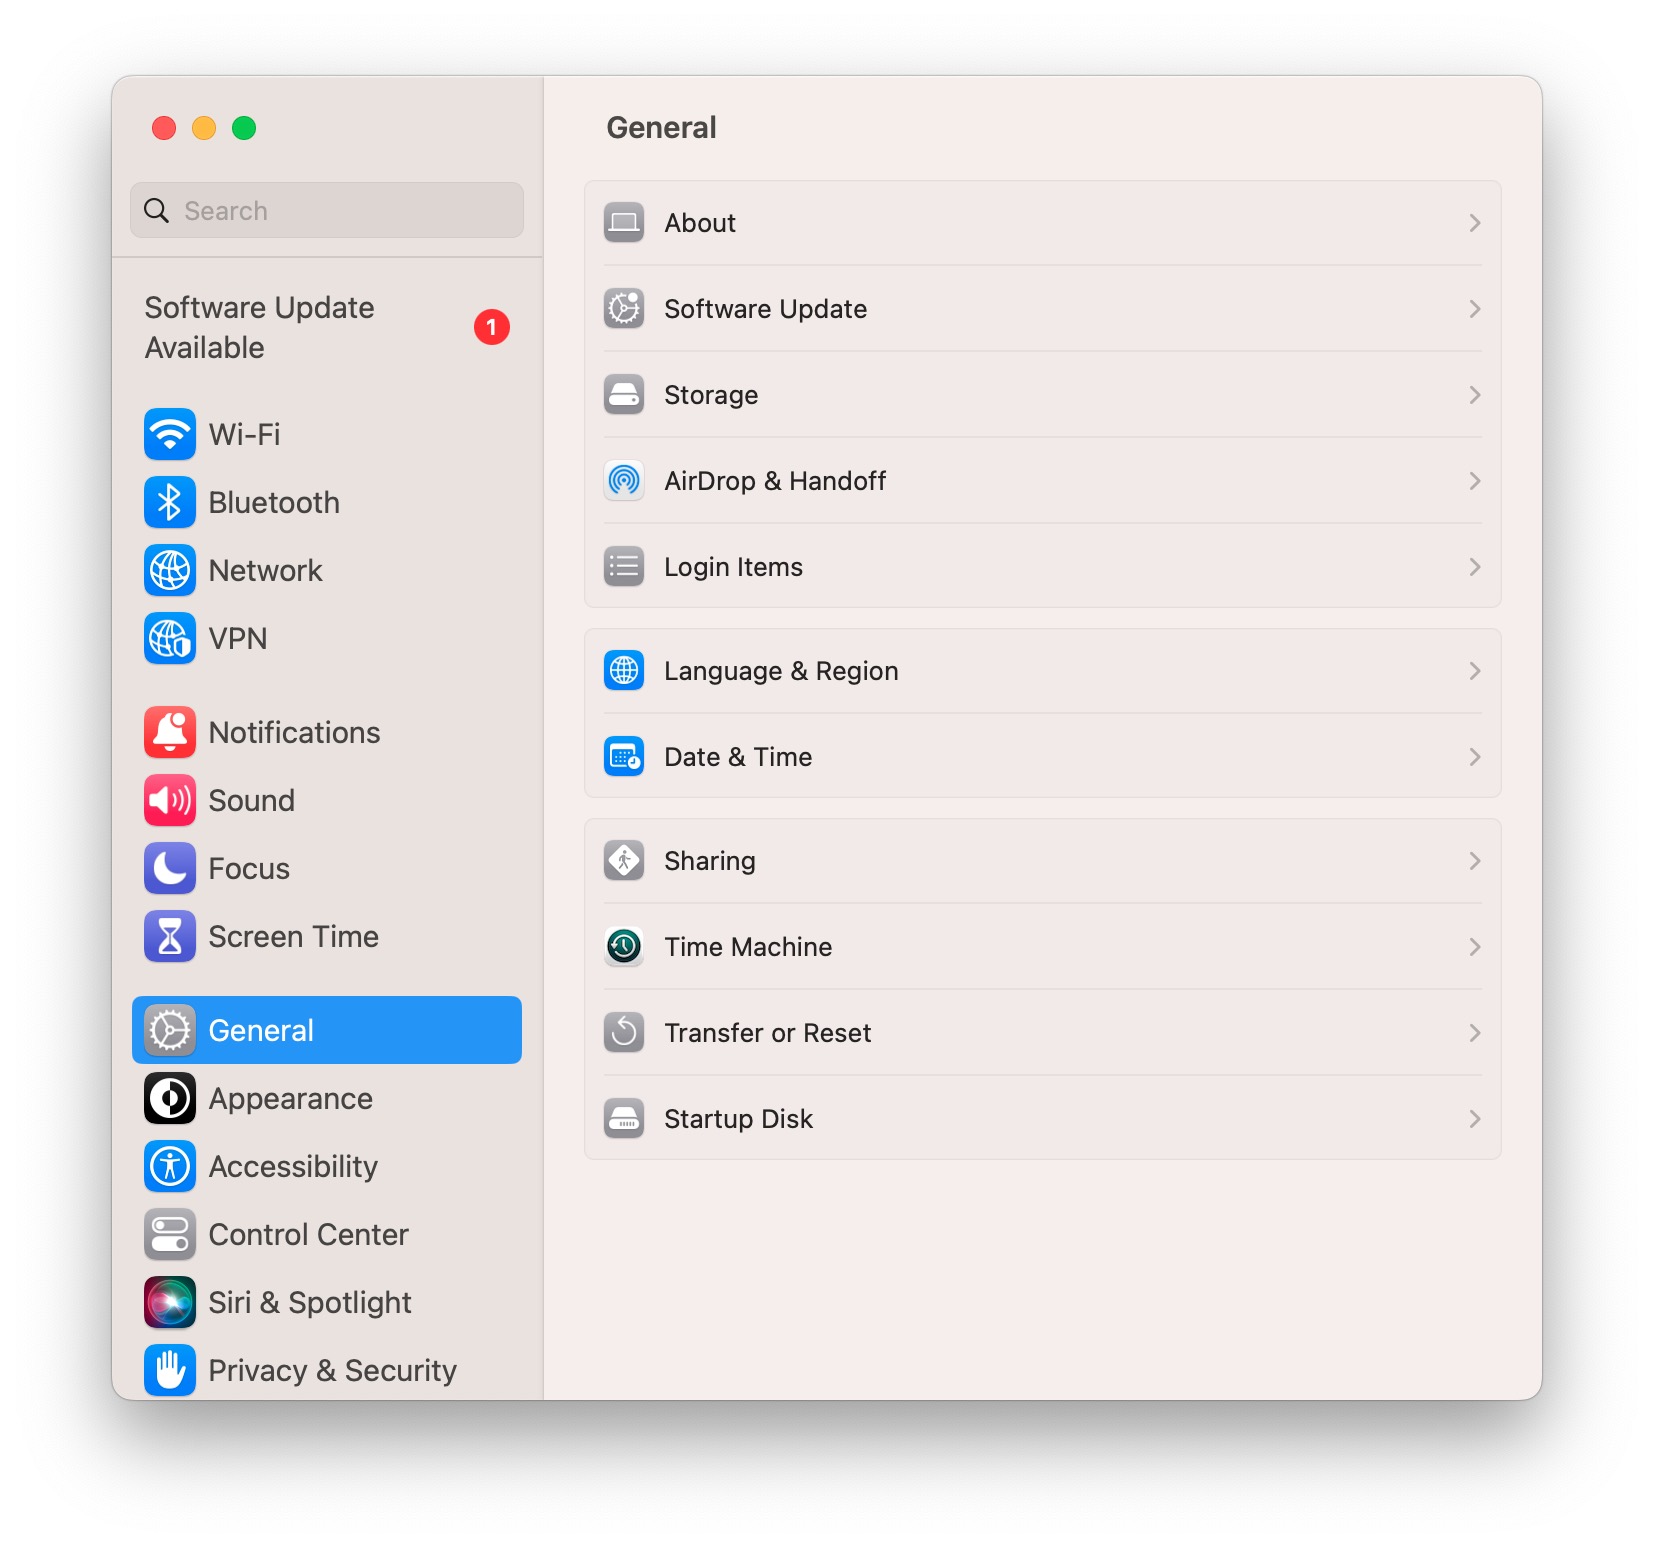 Launch the alternative software
Access the settings or preferences menu